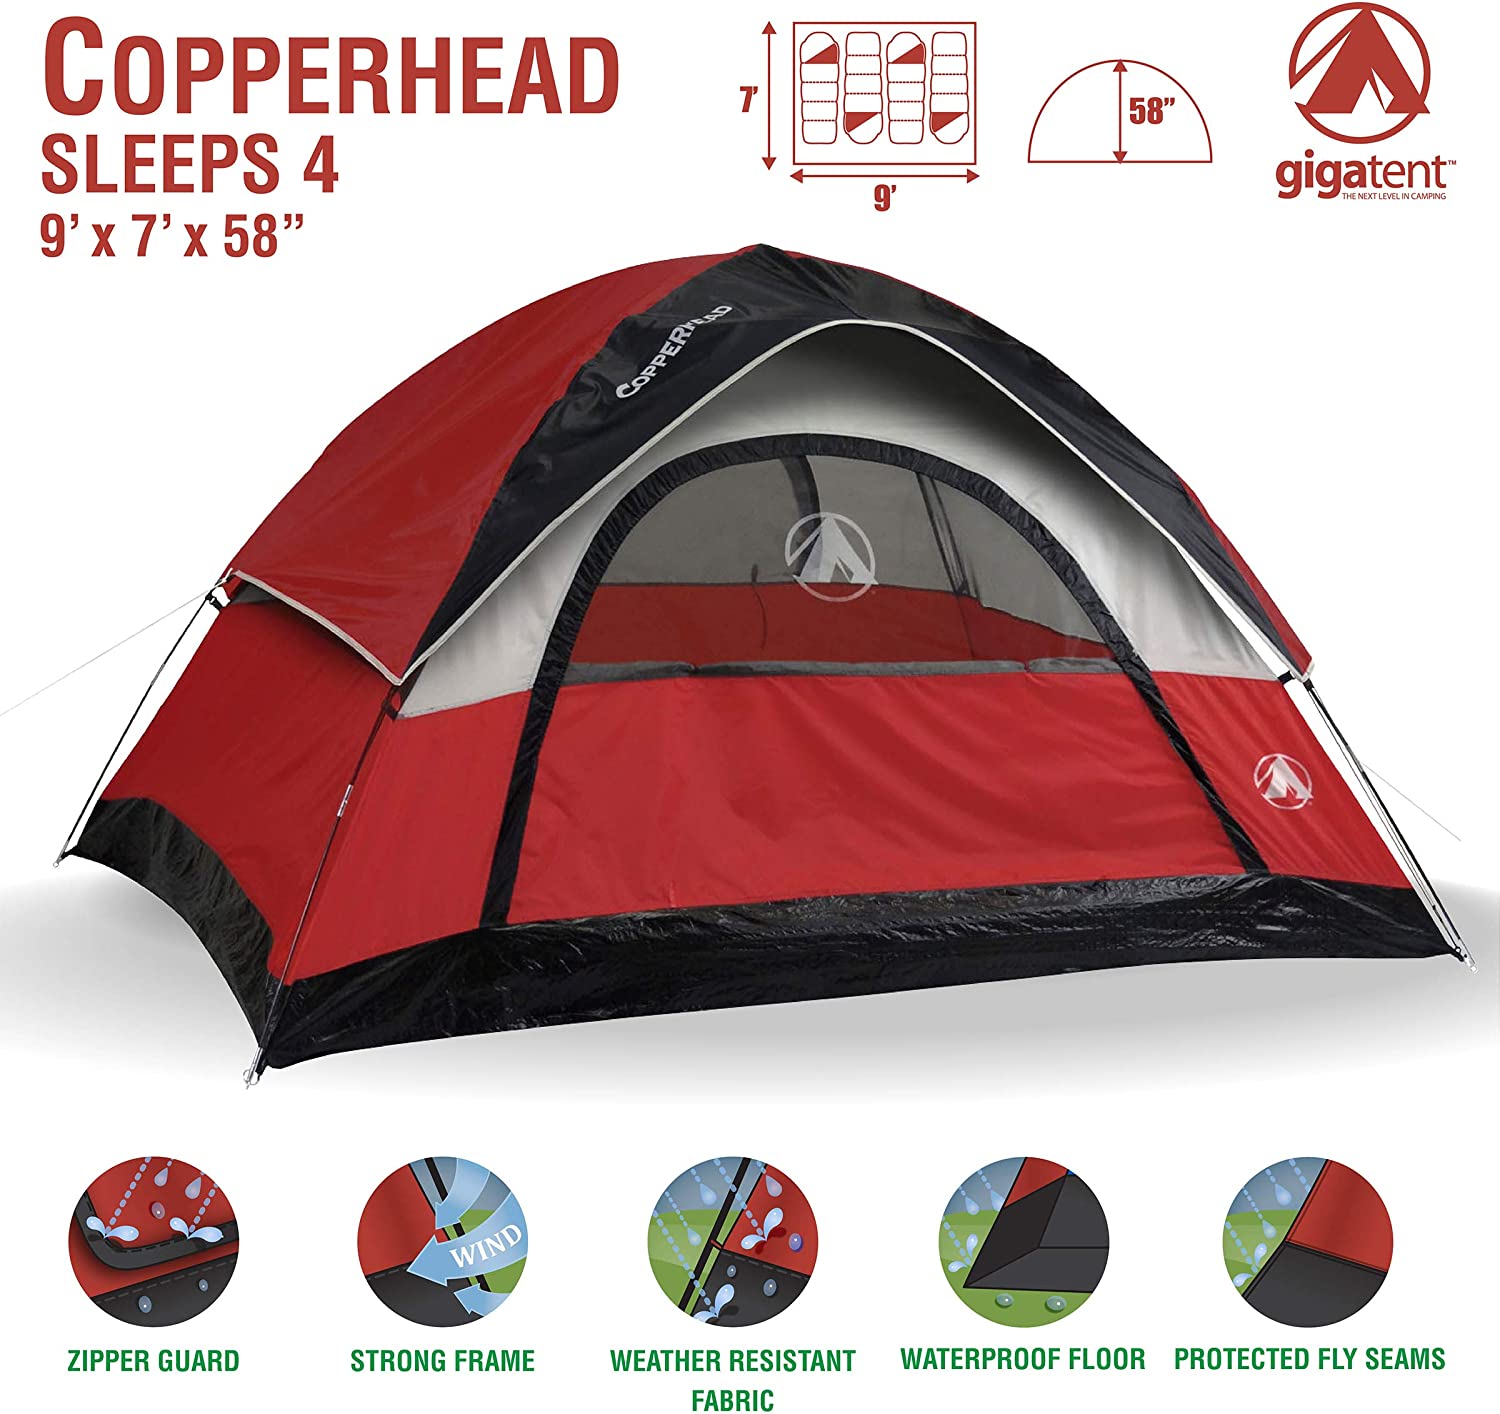  2. Gigatent 4 Person Camping Tent 